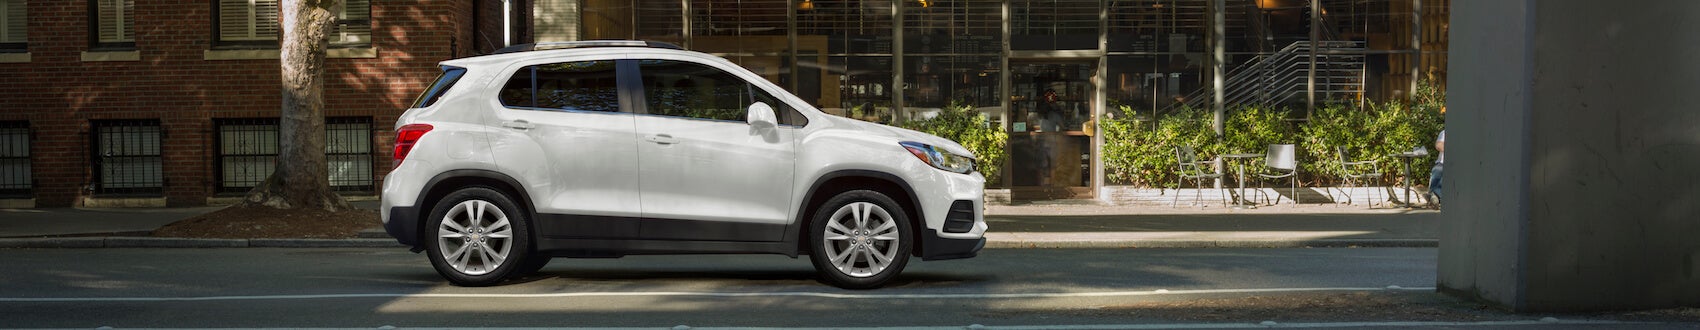 Chevy Trax lease deals near Howell, MI